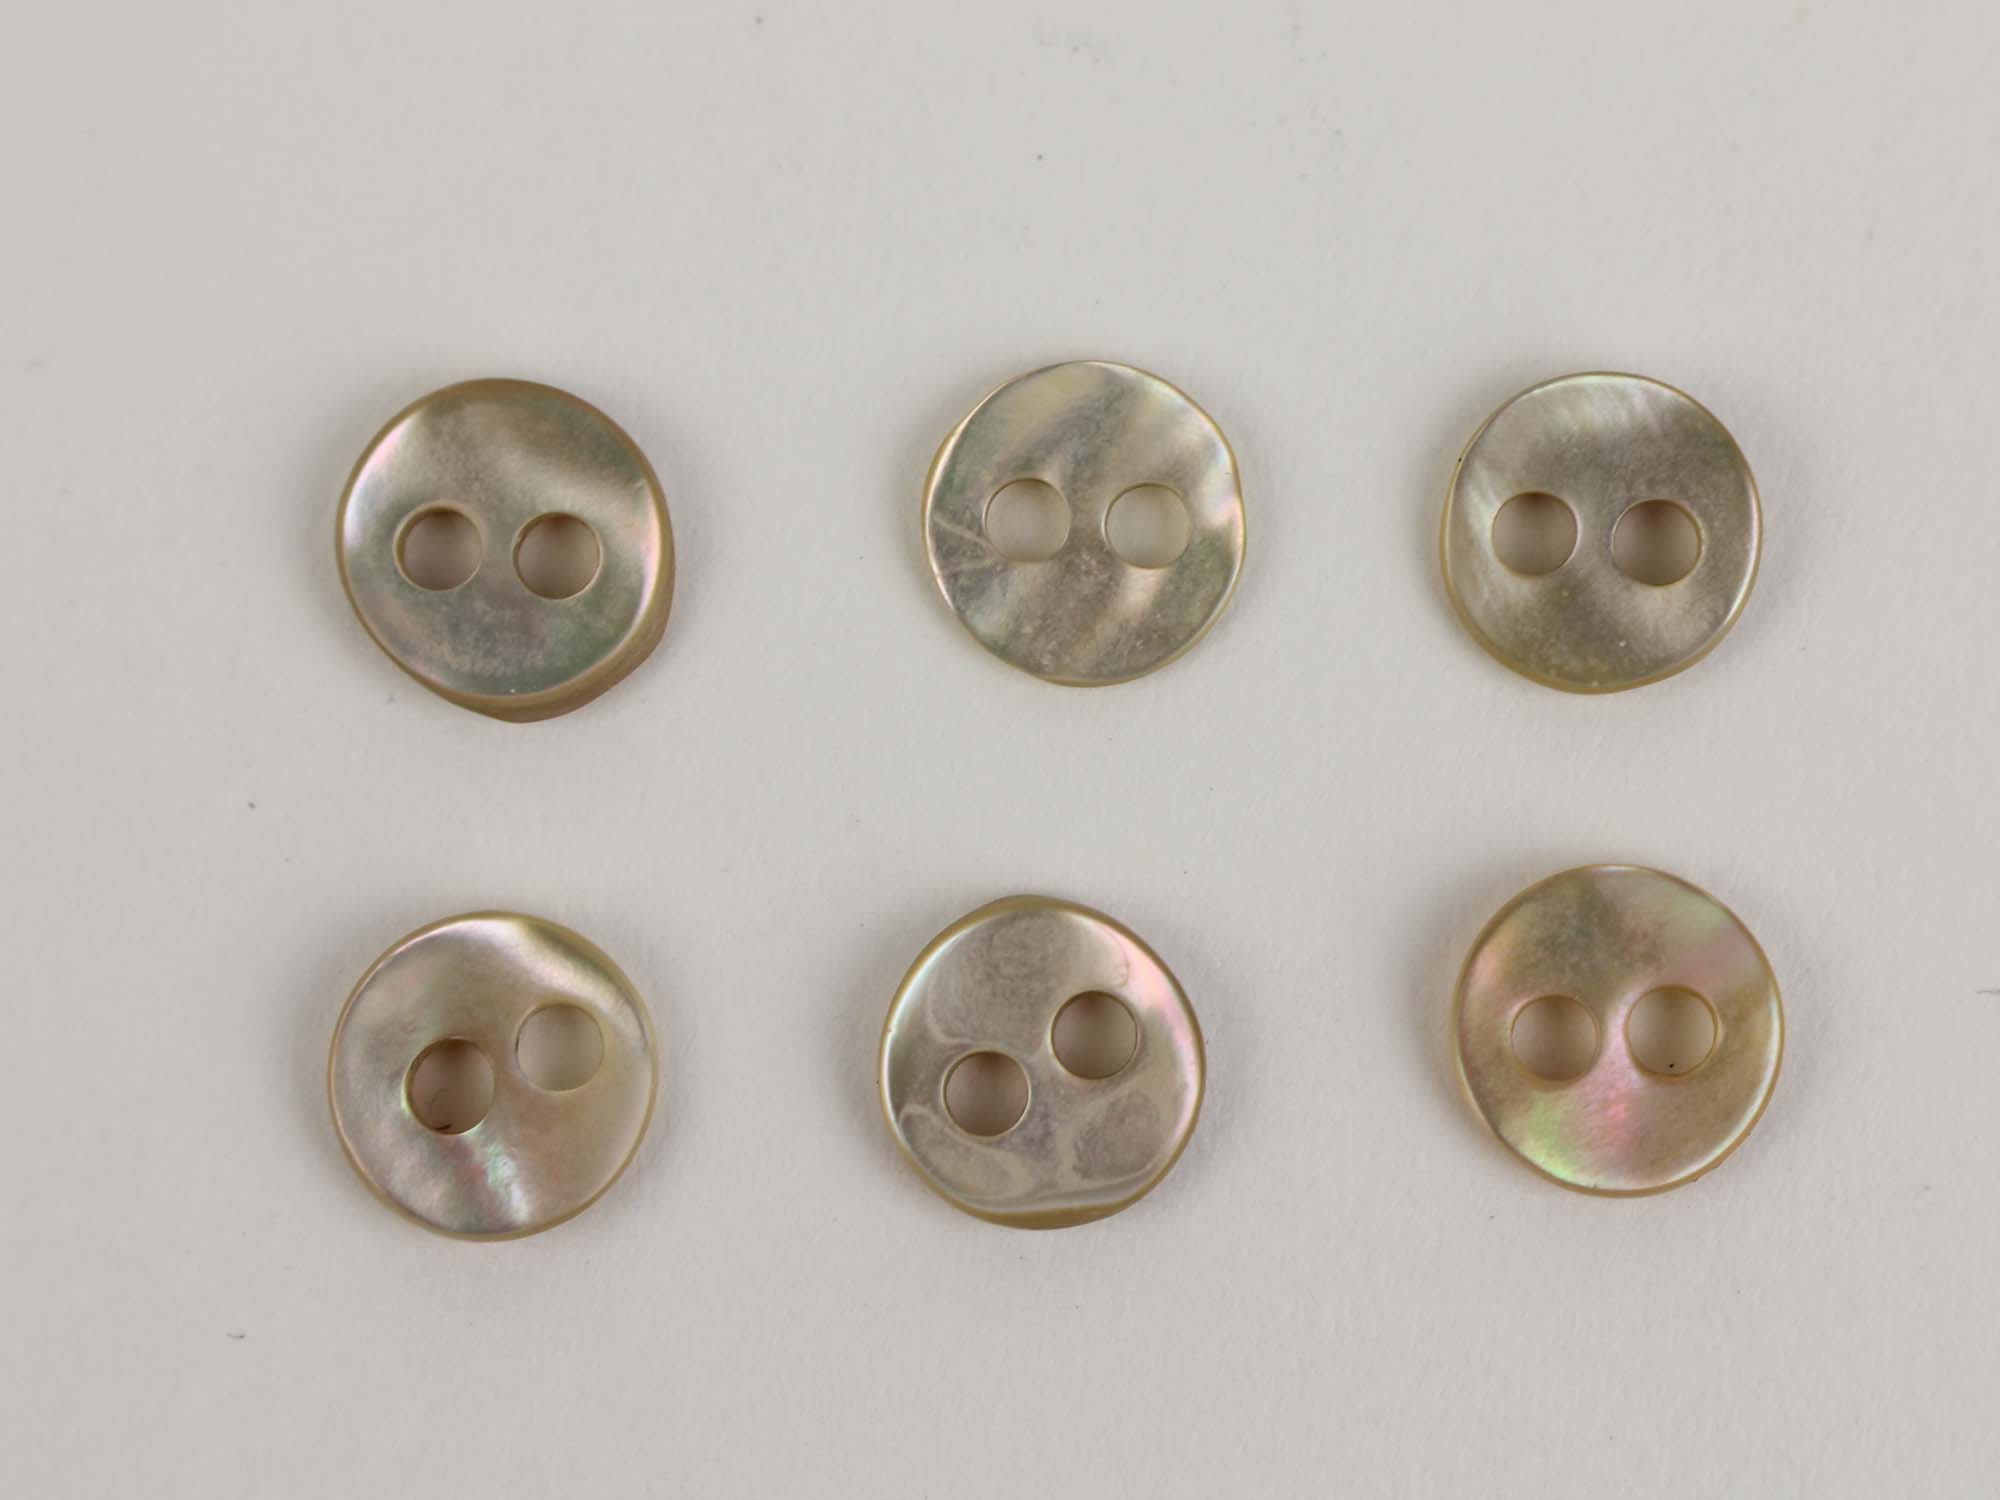 495AF-1.50 Ten Q6 60L  1.5  38mm African Abalone Shell Buttons 10